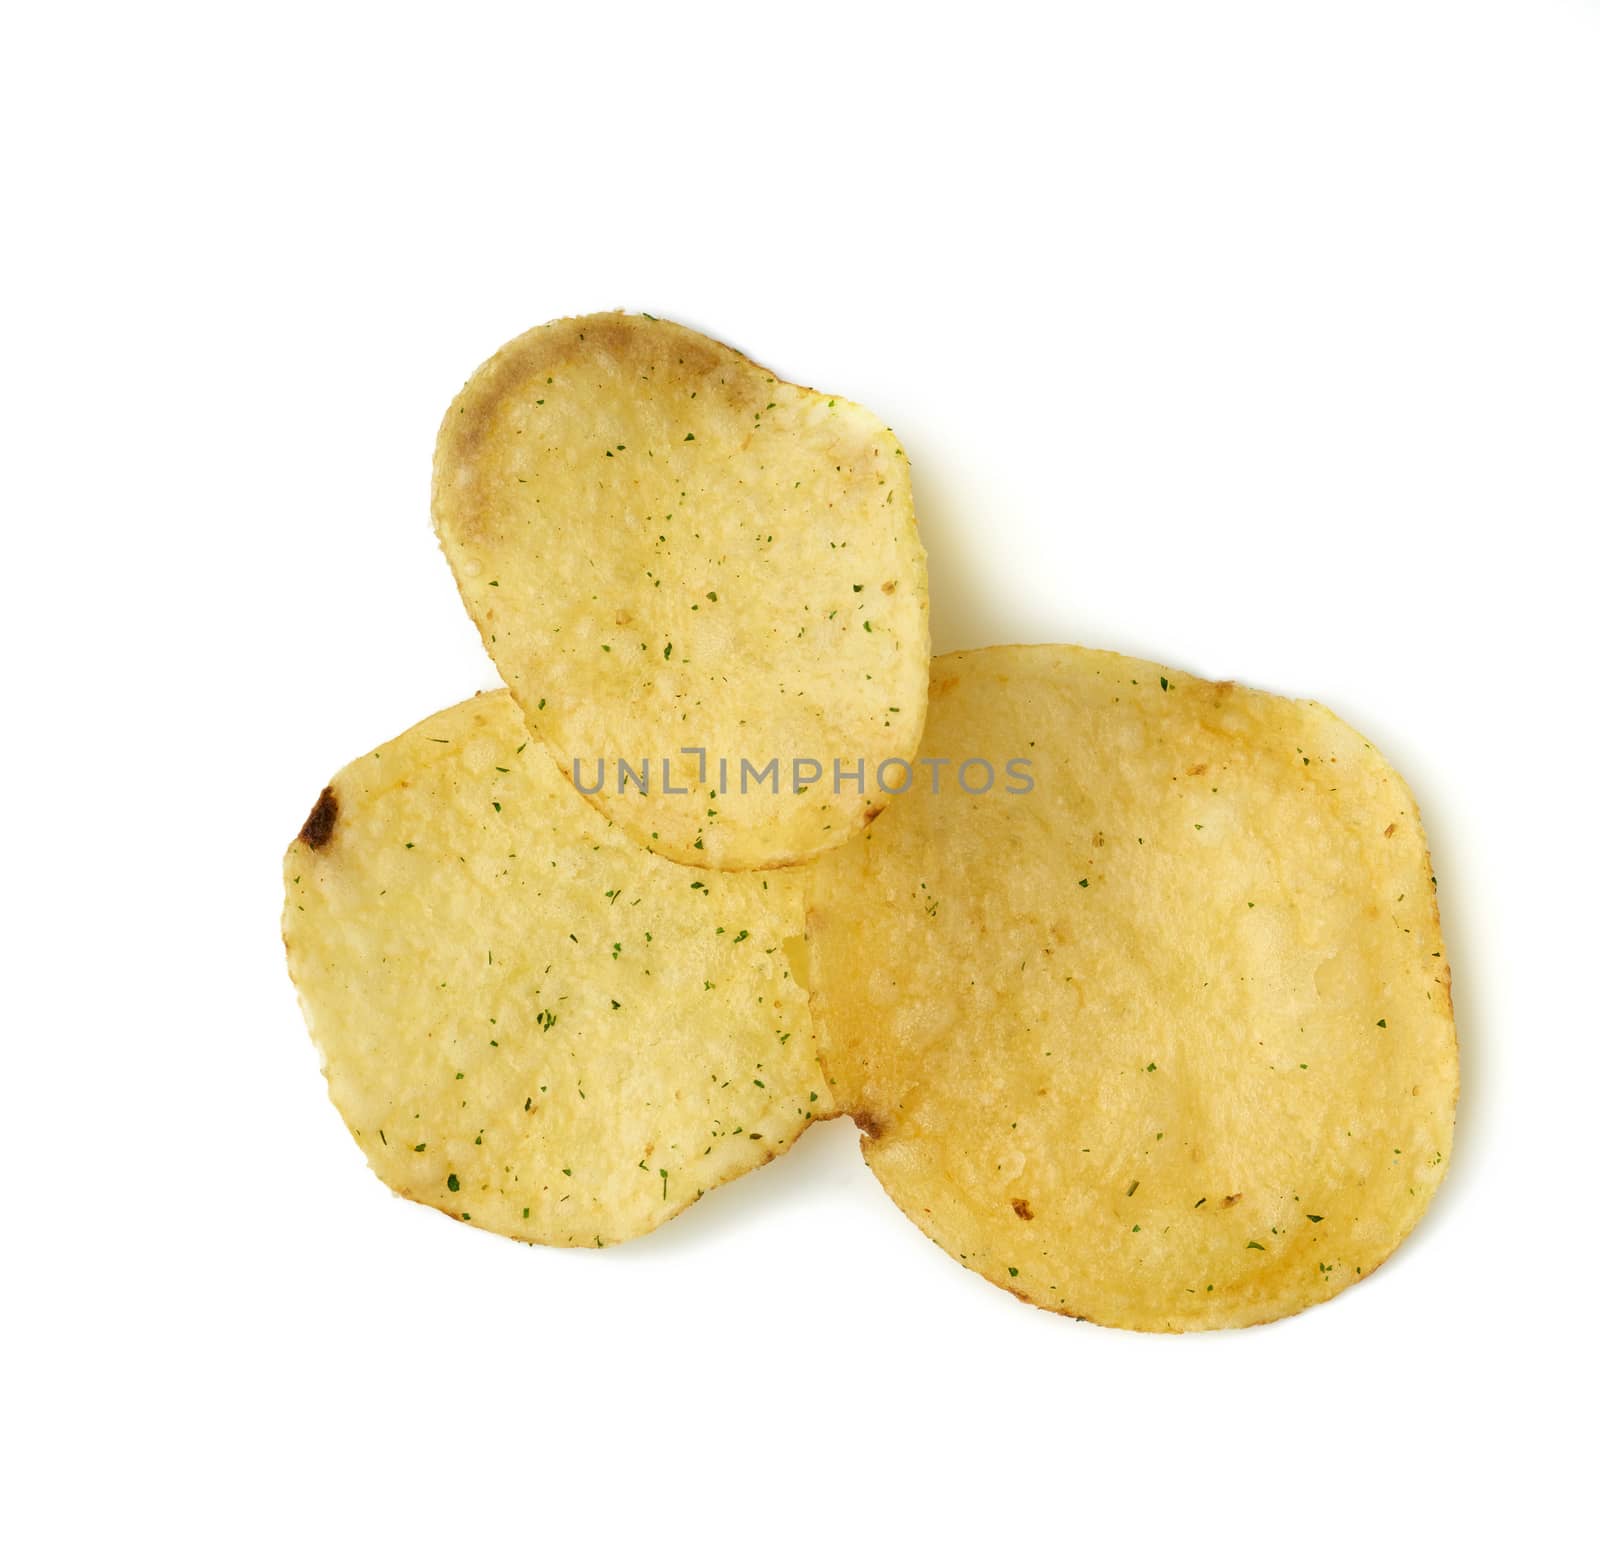 round yellow fried potato chips with dill, food with spice by ndanko